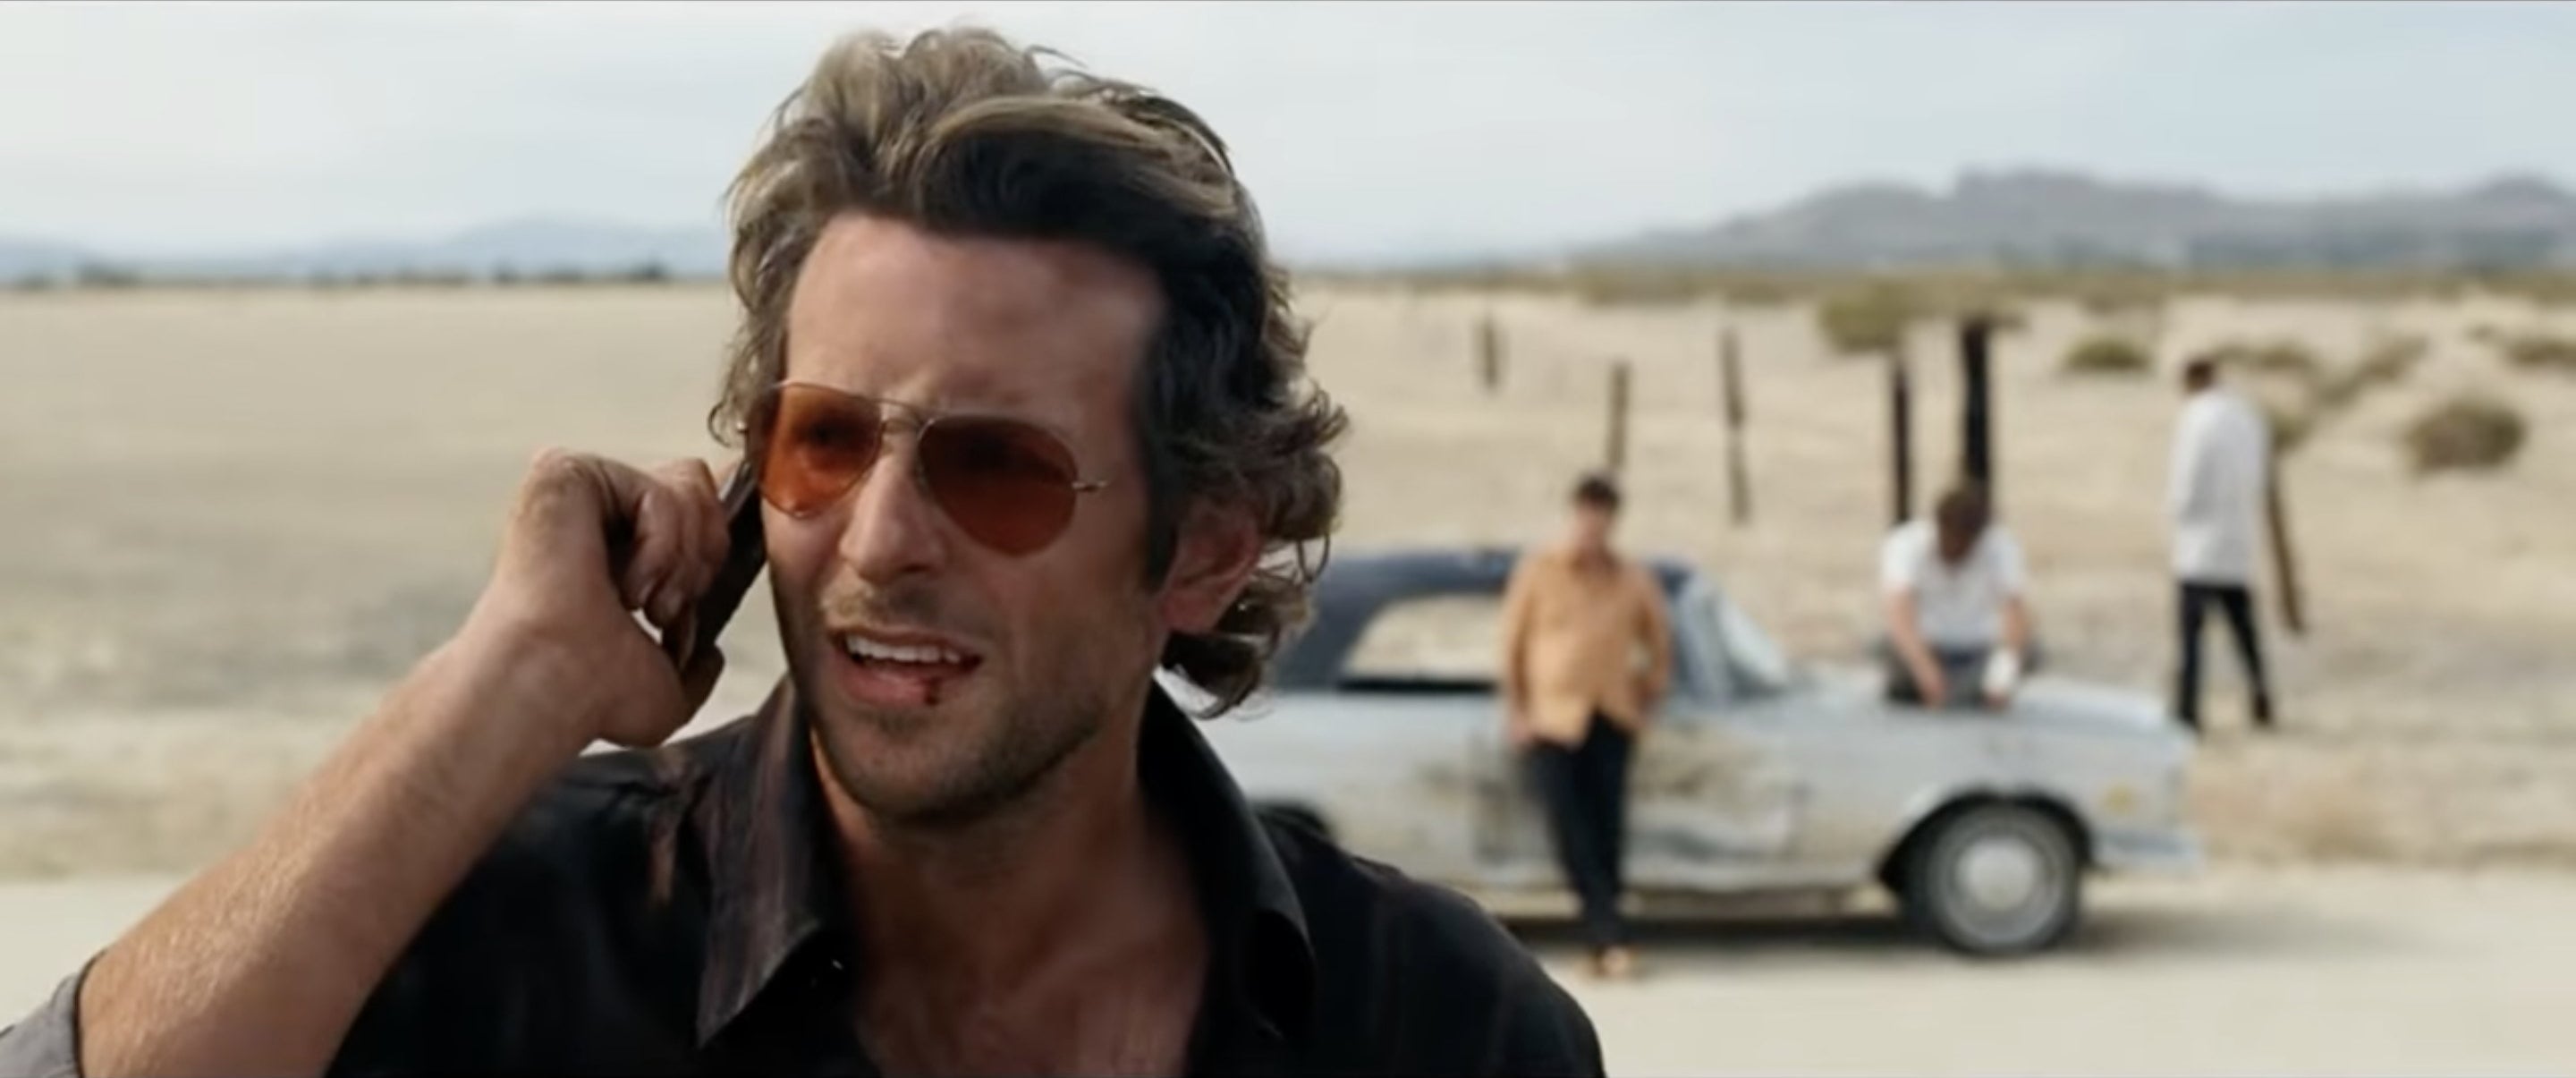 Guy on the phone in &quot;The Hangover&quot;